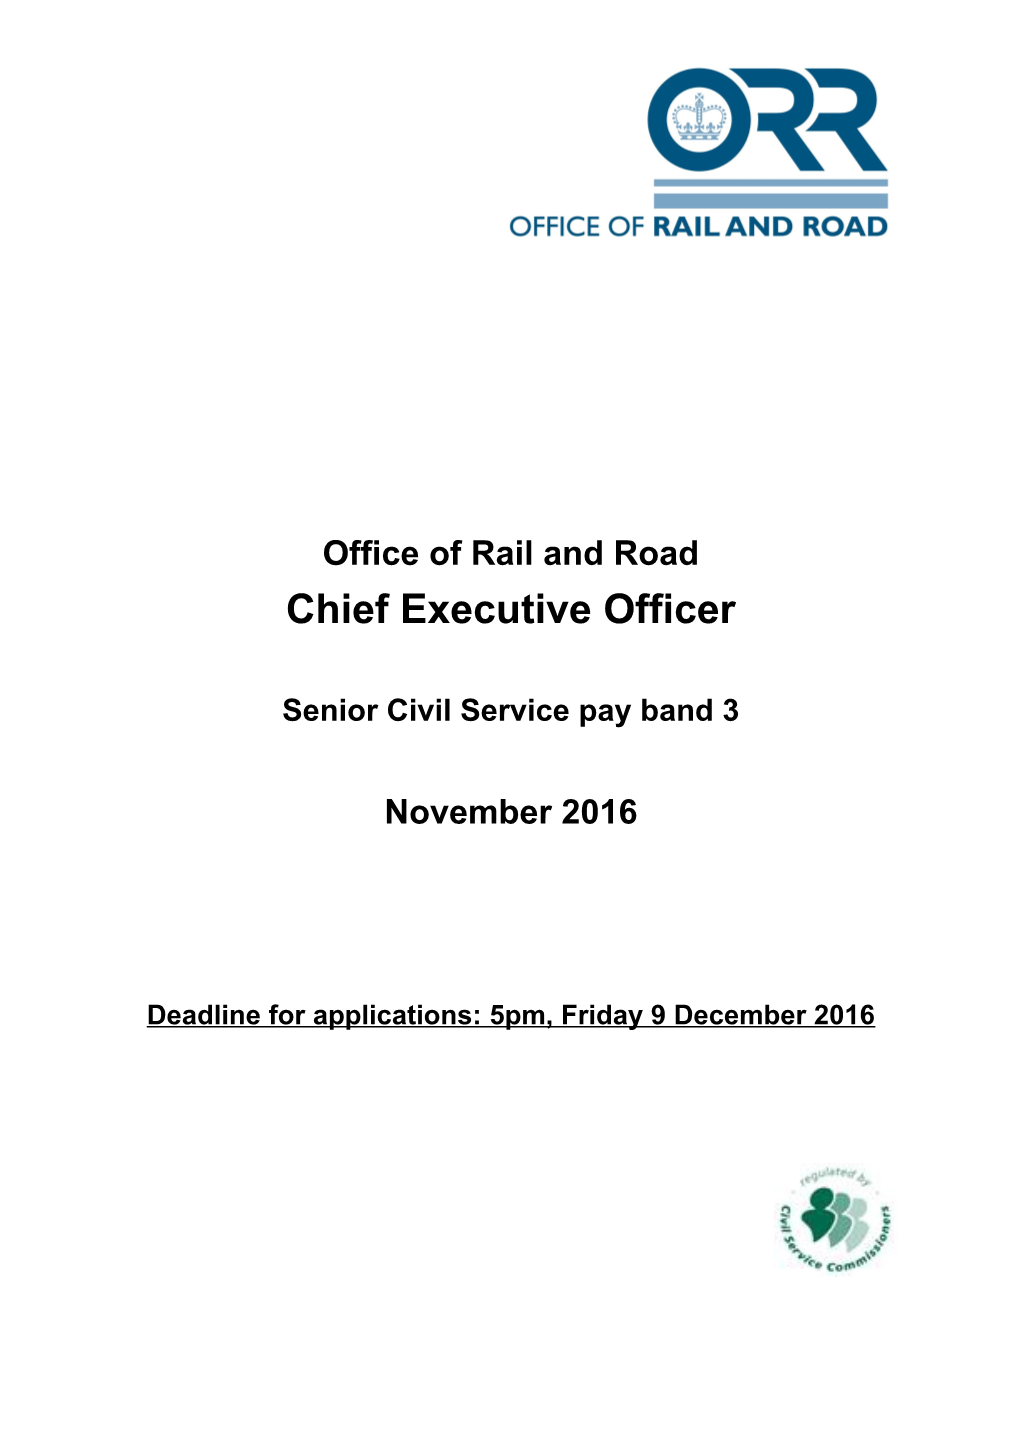 Office of Rail and Road, Chief Executive Officer - November 2016